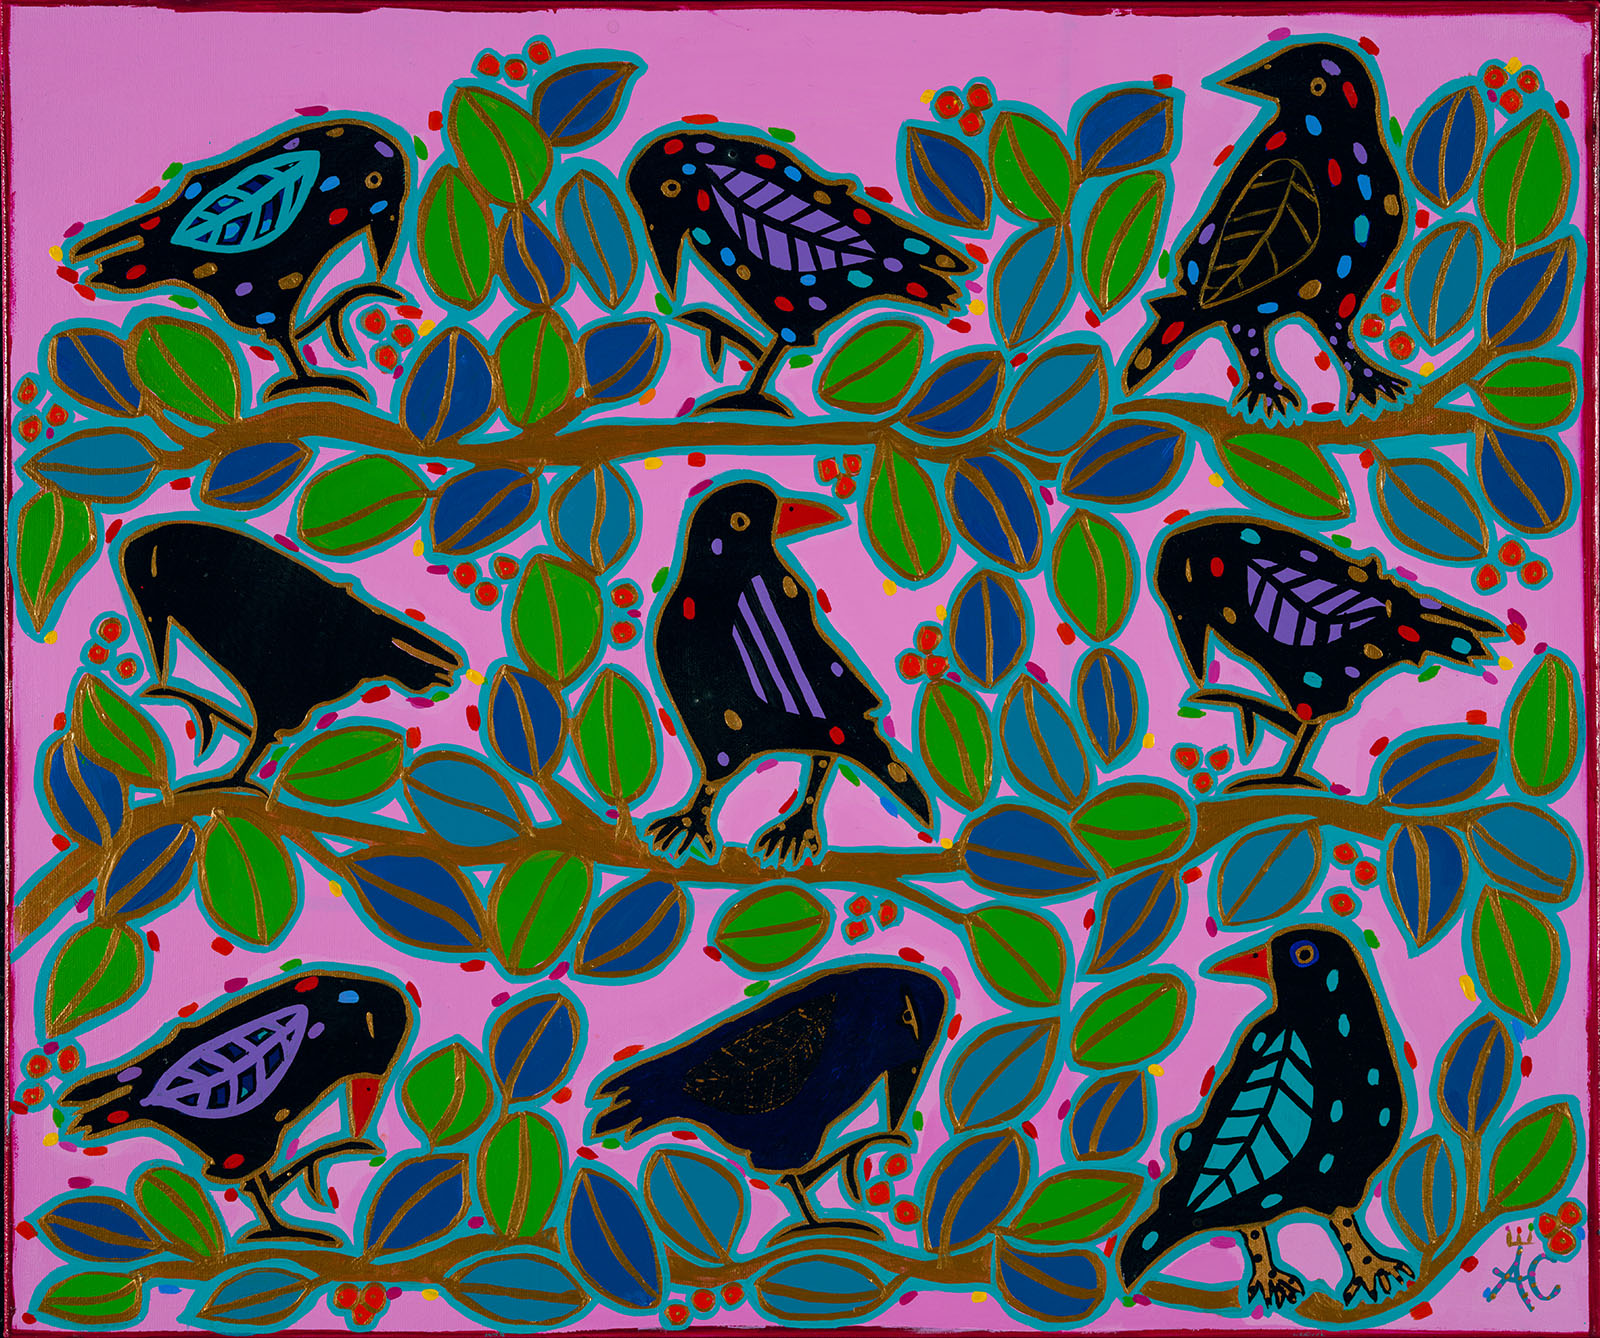 Chartrand - Bird nation pink sky in the morning 342 - 20x24 - 480$